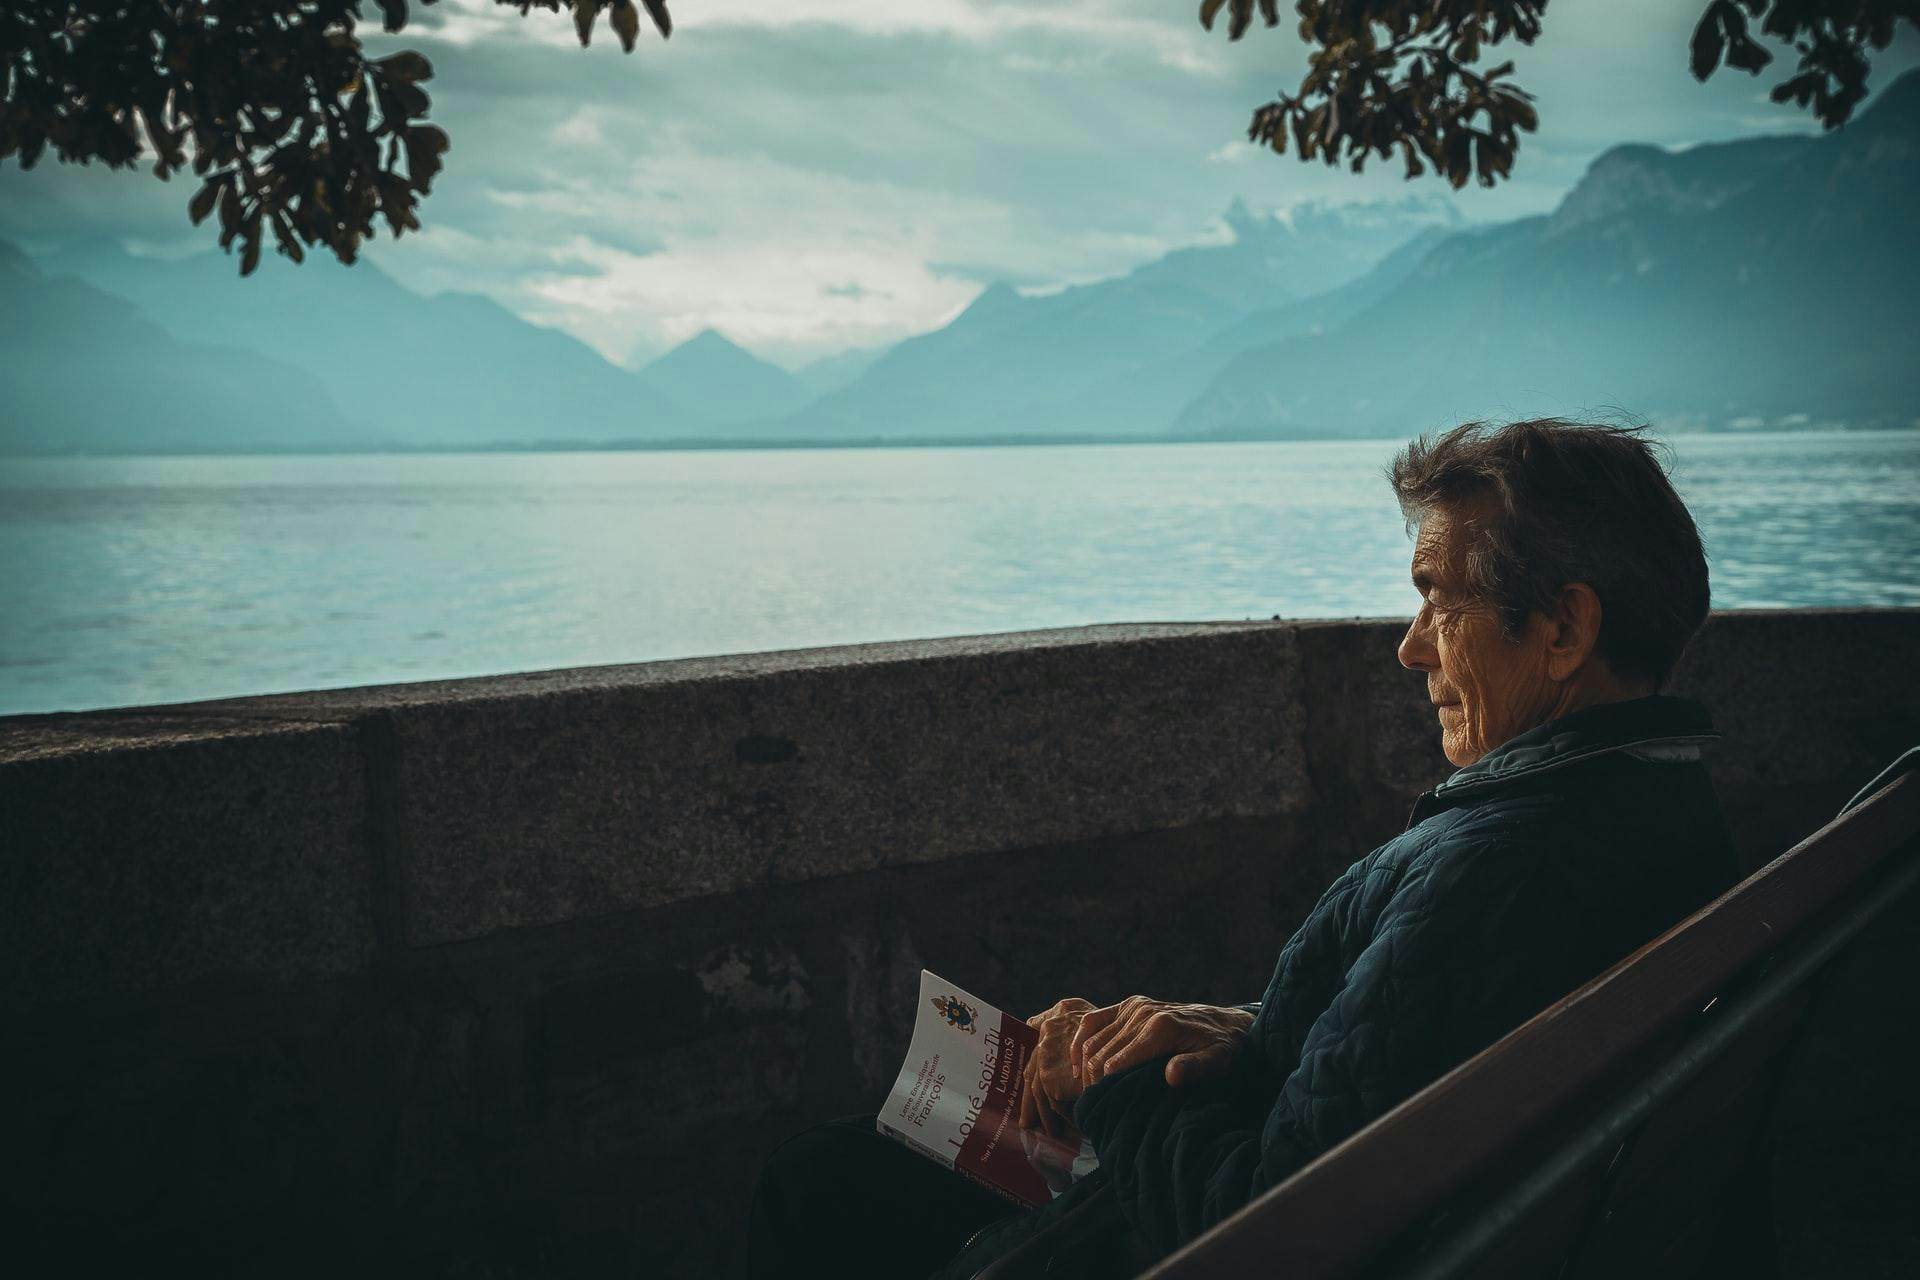 How do you deal with loneliness in old age?